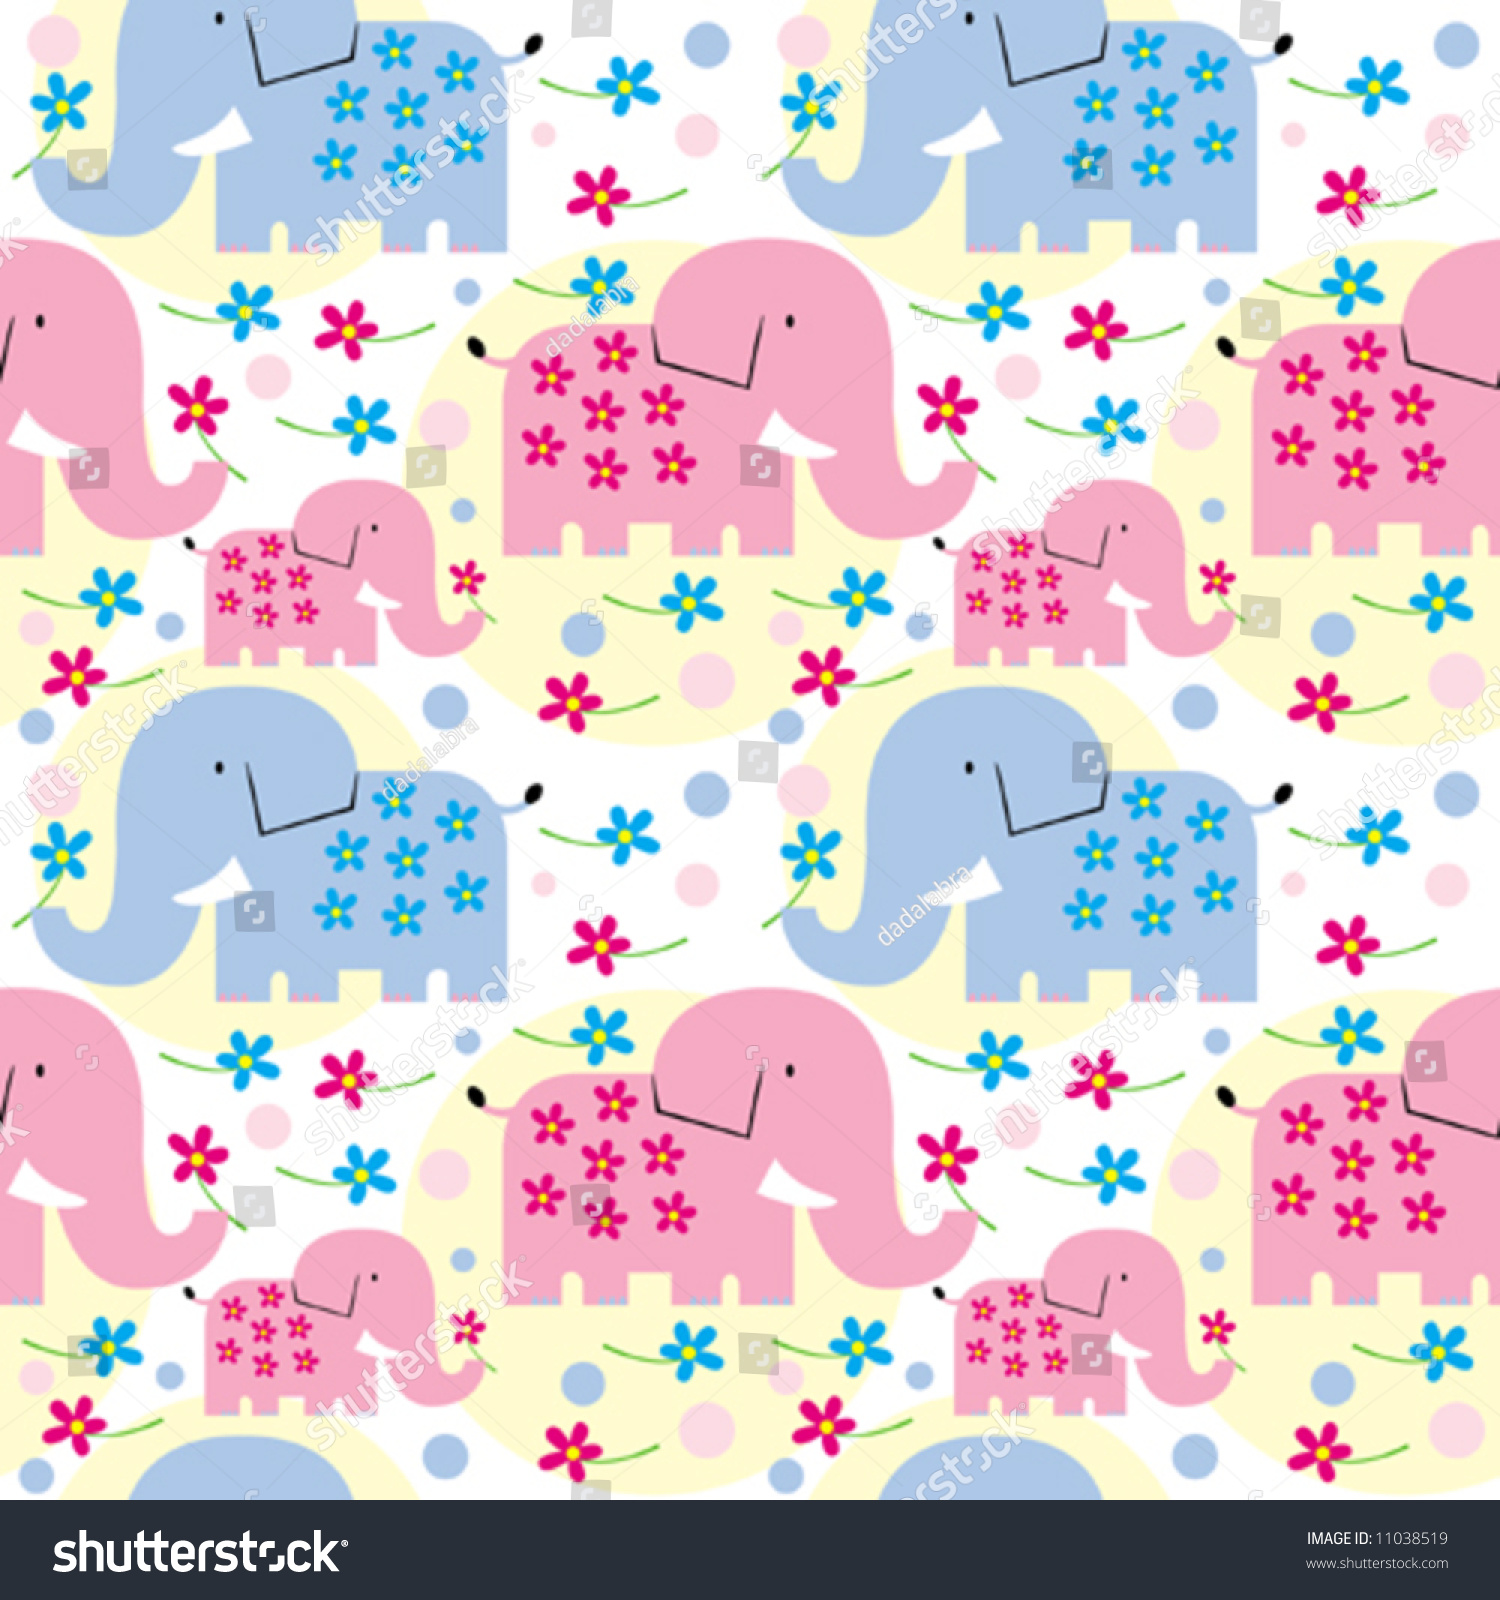 Pink And Blue Floral Elephants In Seamless Vector Pattern - 11038519 ...